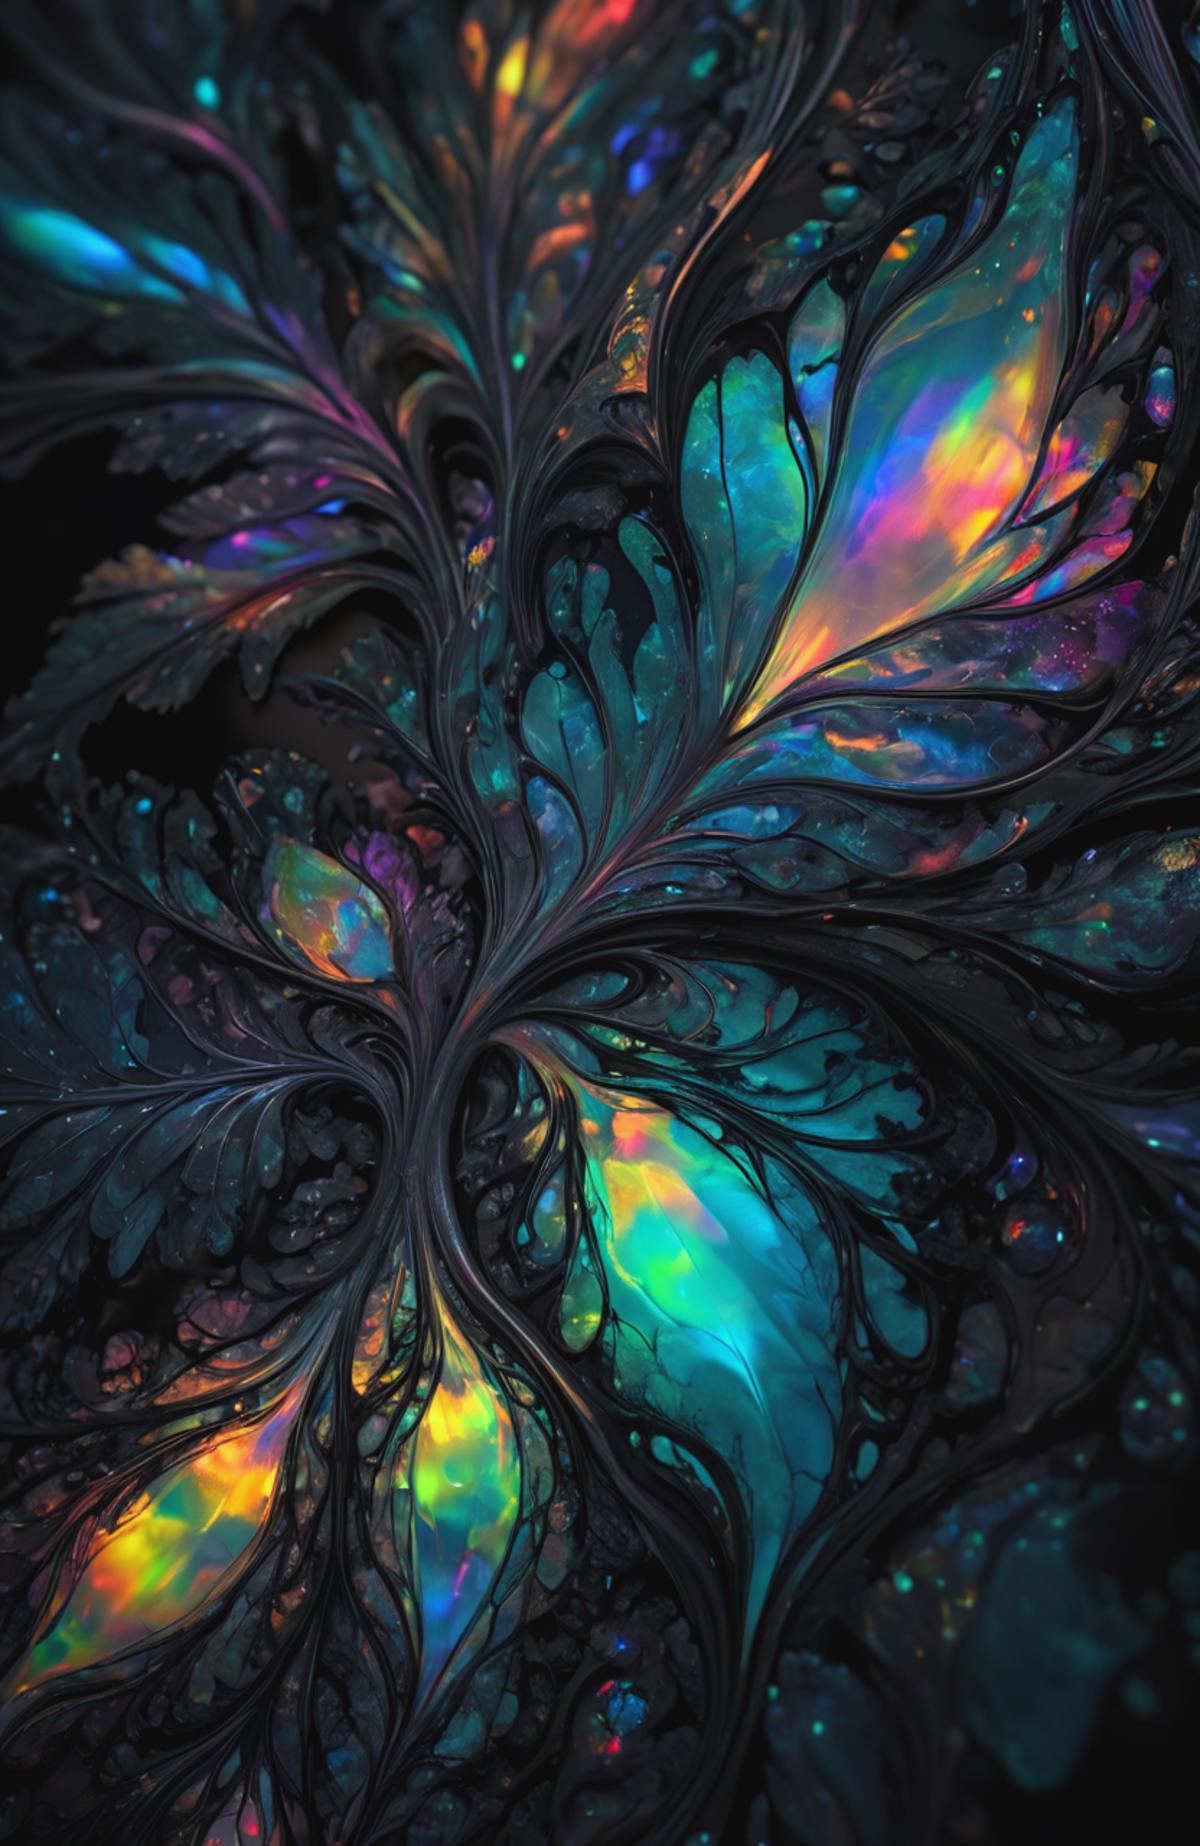 Abstract art featuring a large blue flower with a black background and colorful rainbow-like patterns.